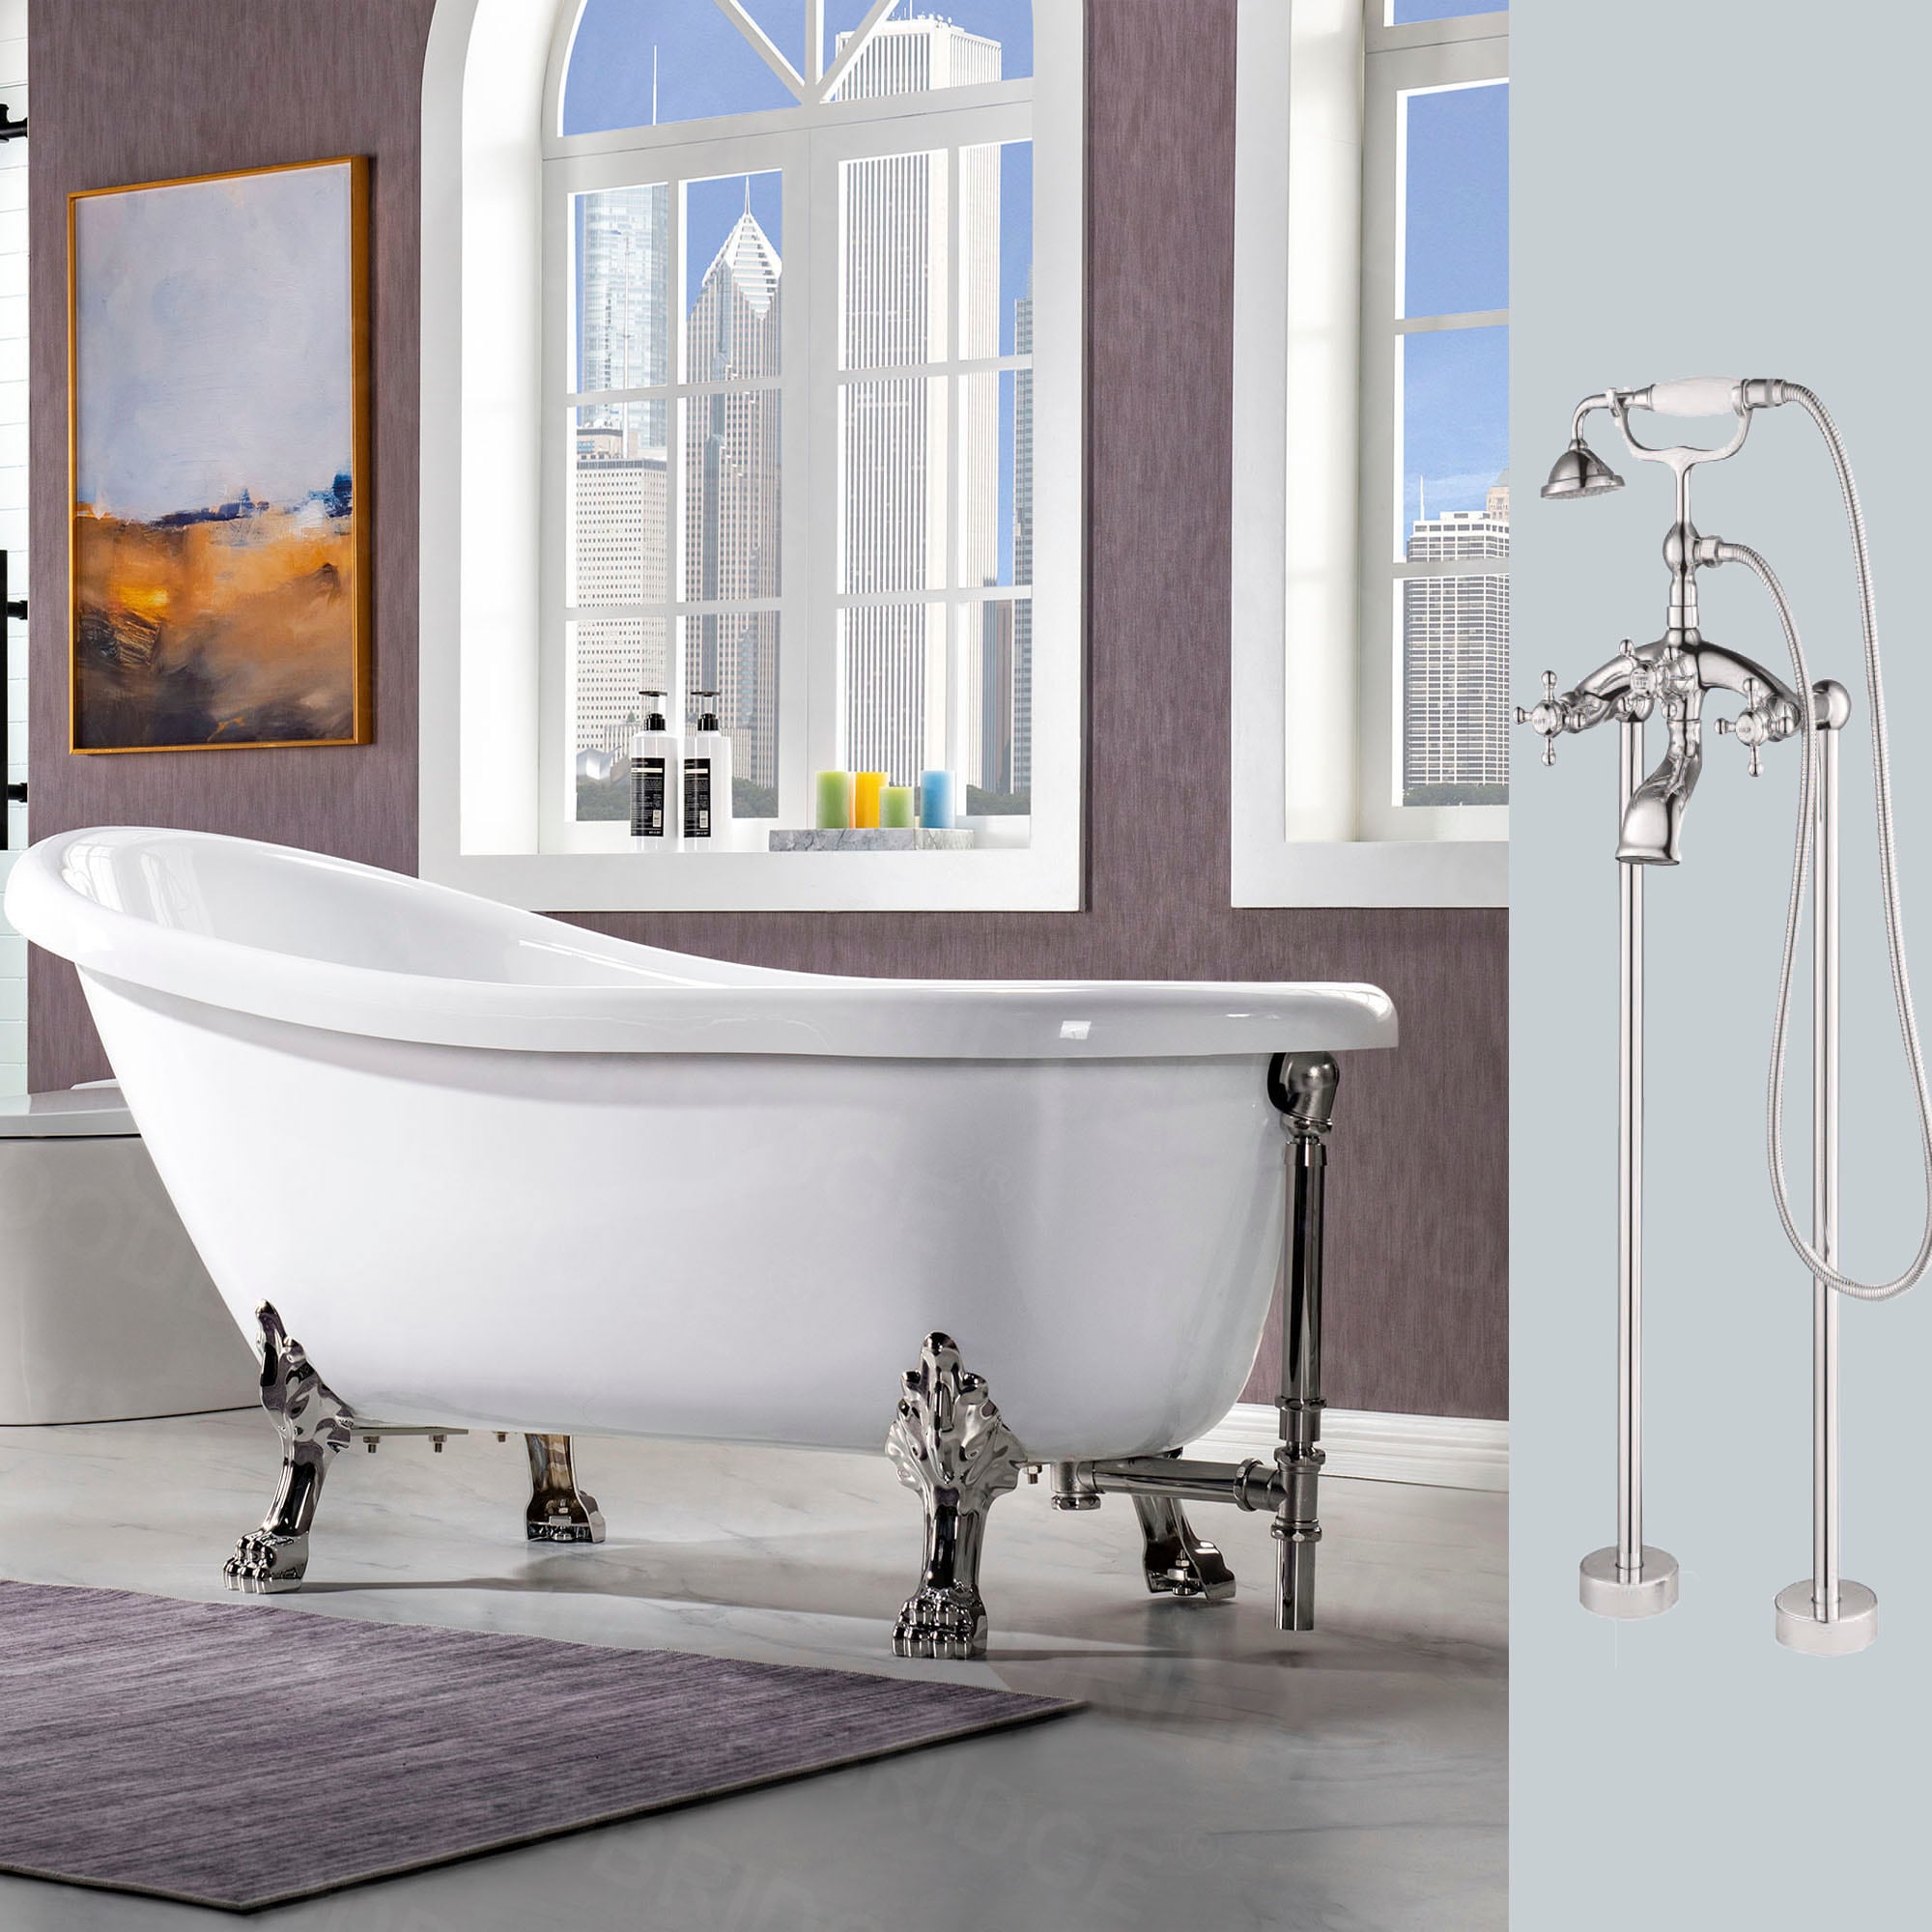 Woodbridge Albi 29.875-in x 67-in White with Brushed Nickel Trim Acrylic Oval Clawfoot Soaking Bathtub with Faucet and Drain (Reversible Drain) -  LB190